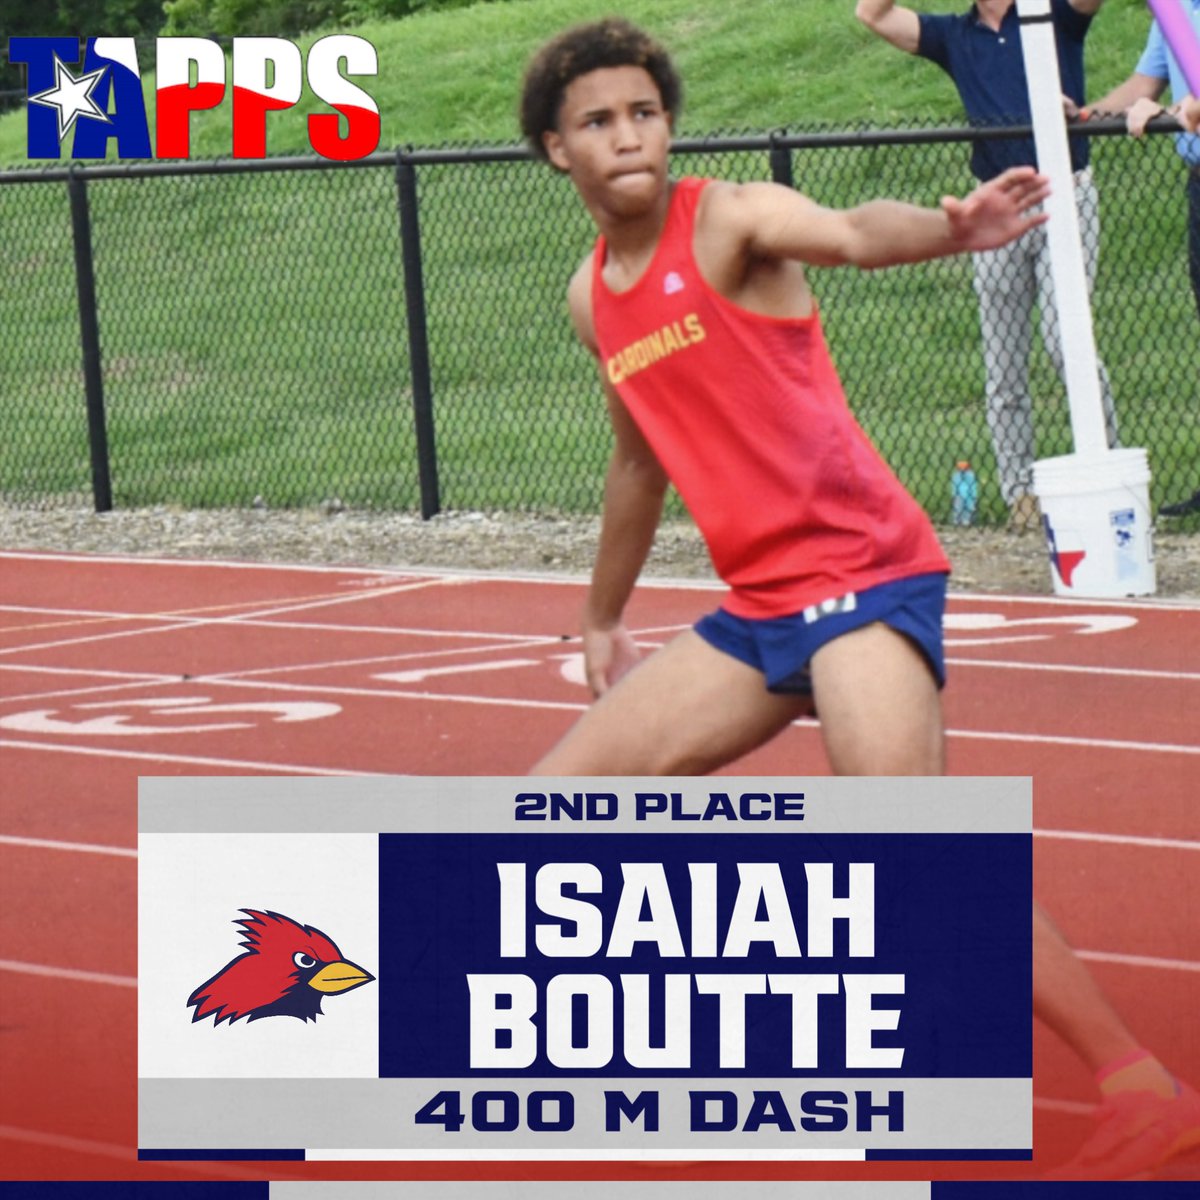 Isaiah Boutte podiums in the 400 M with a 2nd place finish! Congrats Isaiah!! @JPIIHS_Track